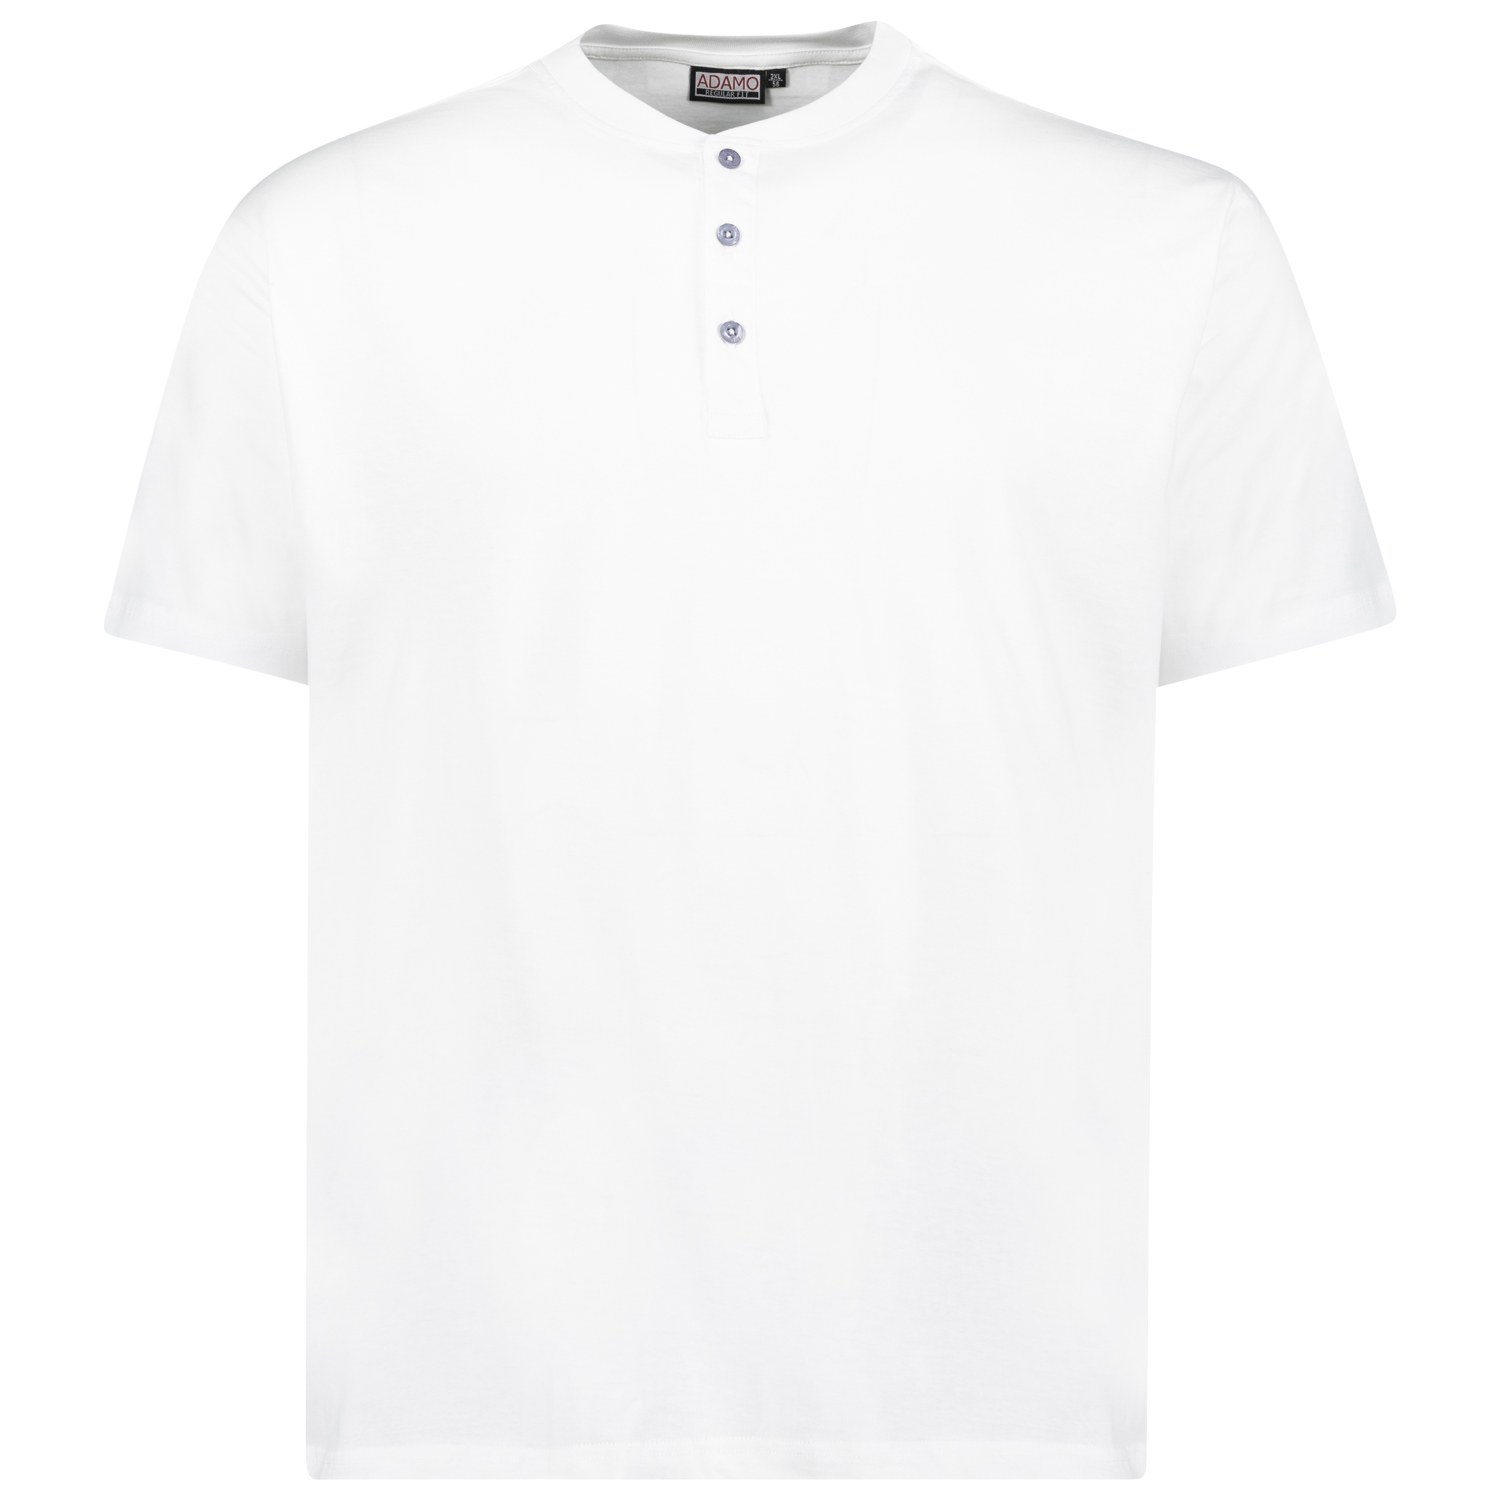 T-shirt in white series Silas regular fit by Adamo for men up to oversize 10XL